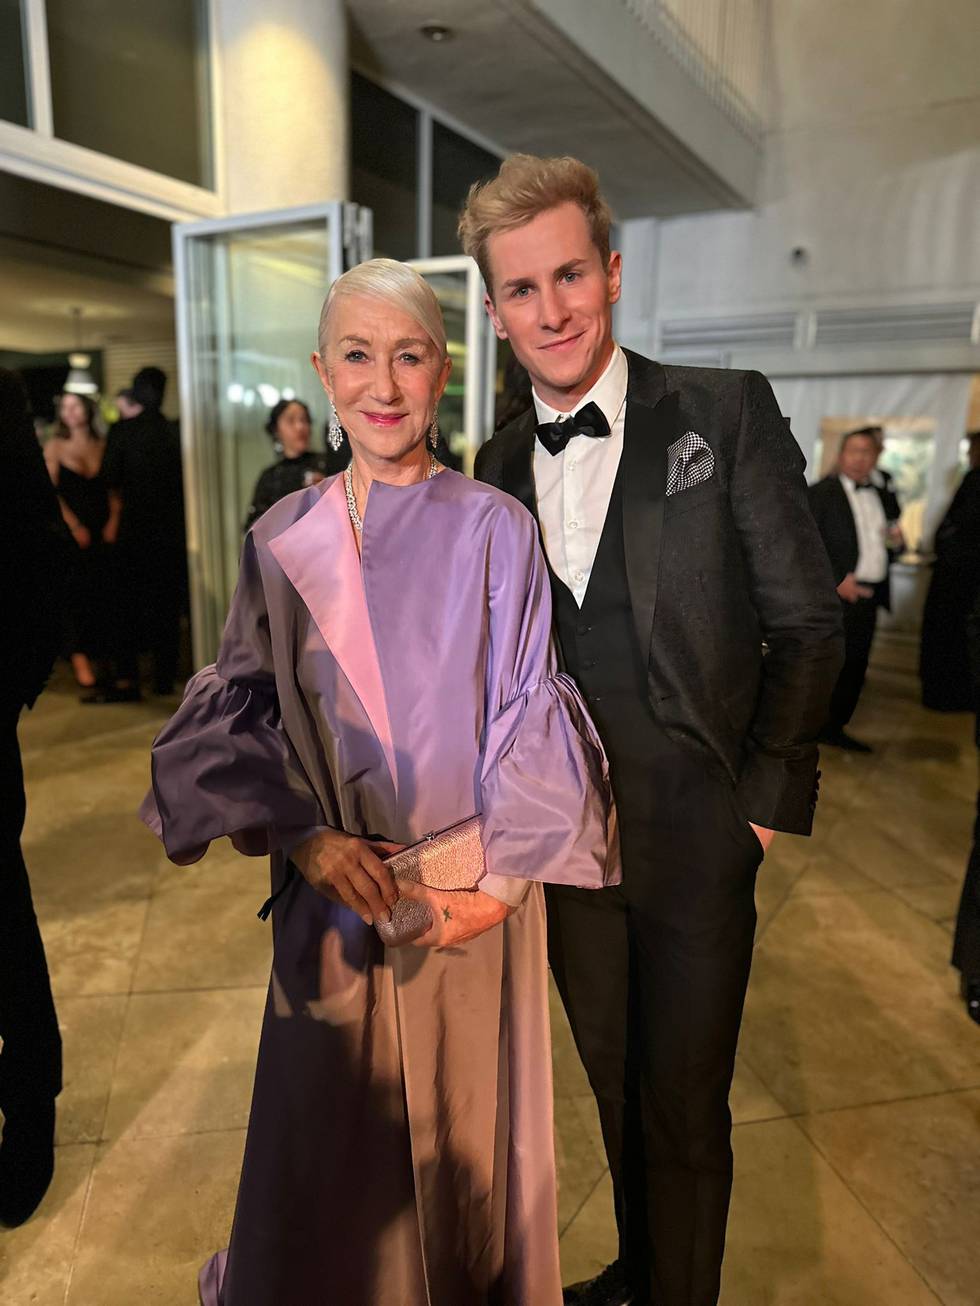 Lukas Sauer with Helen Mirren at GG After Party.JPG